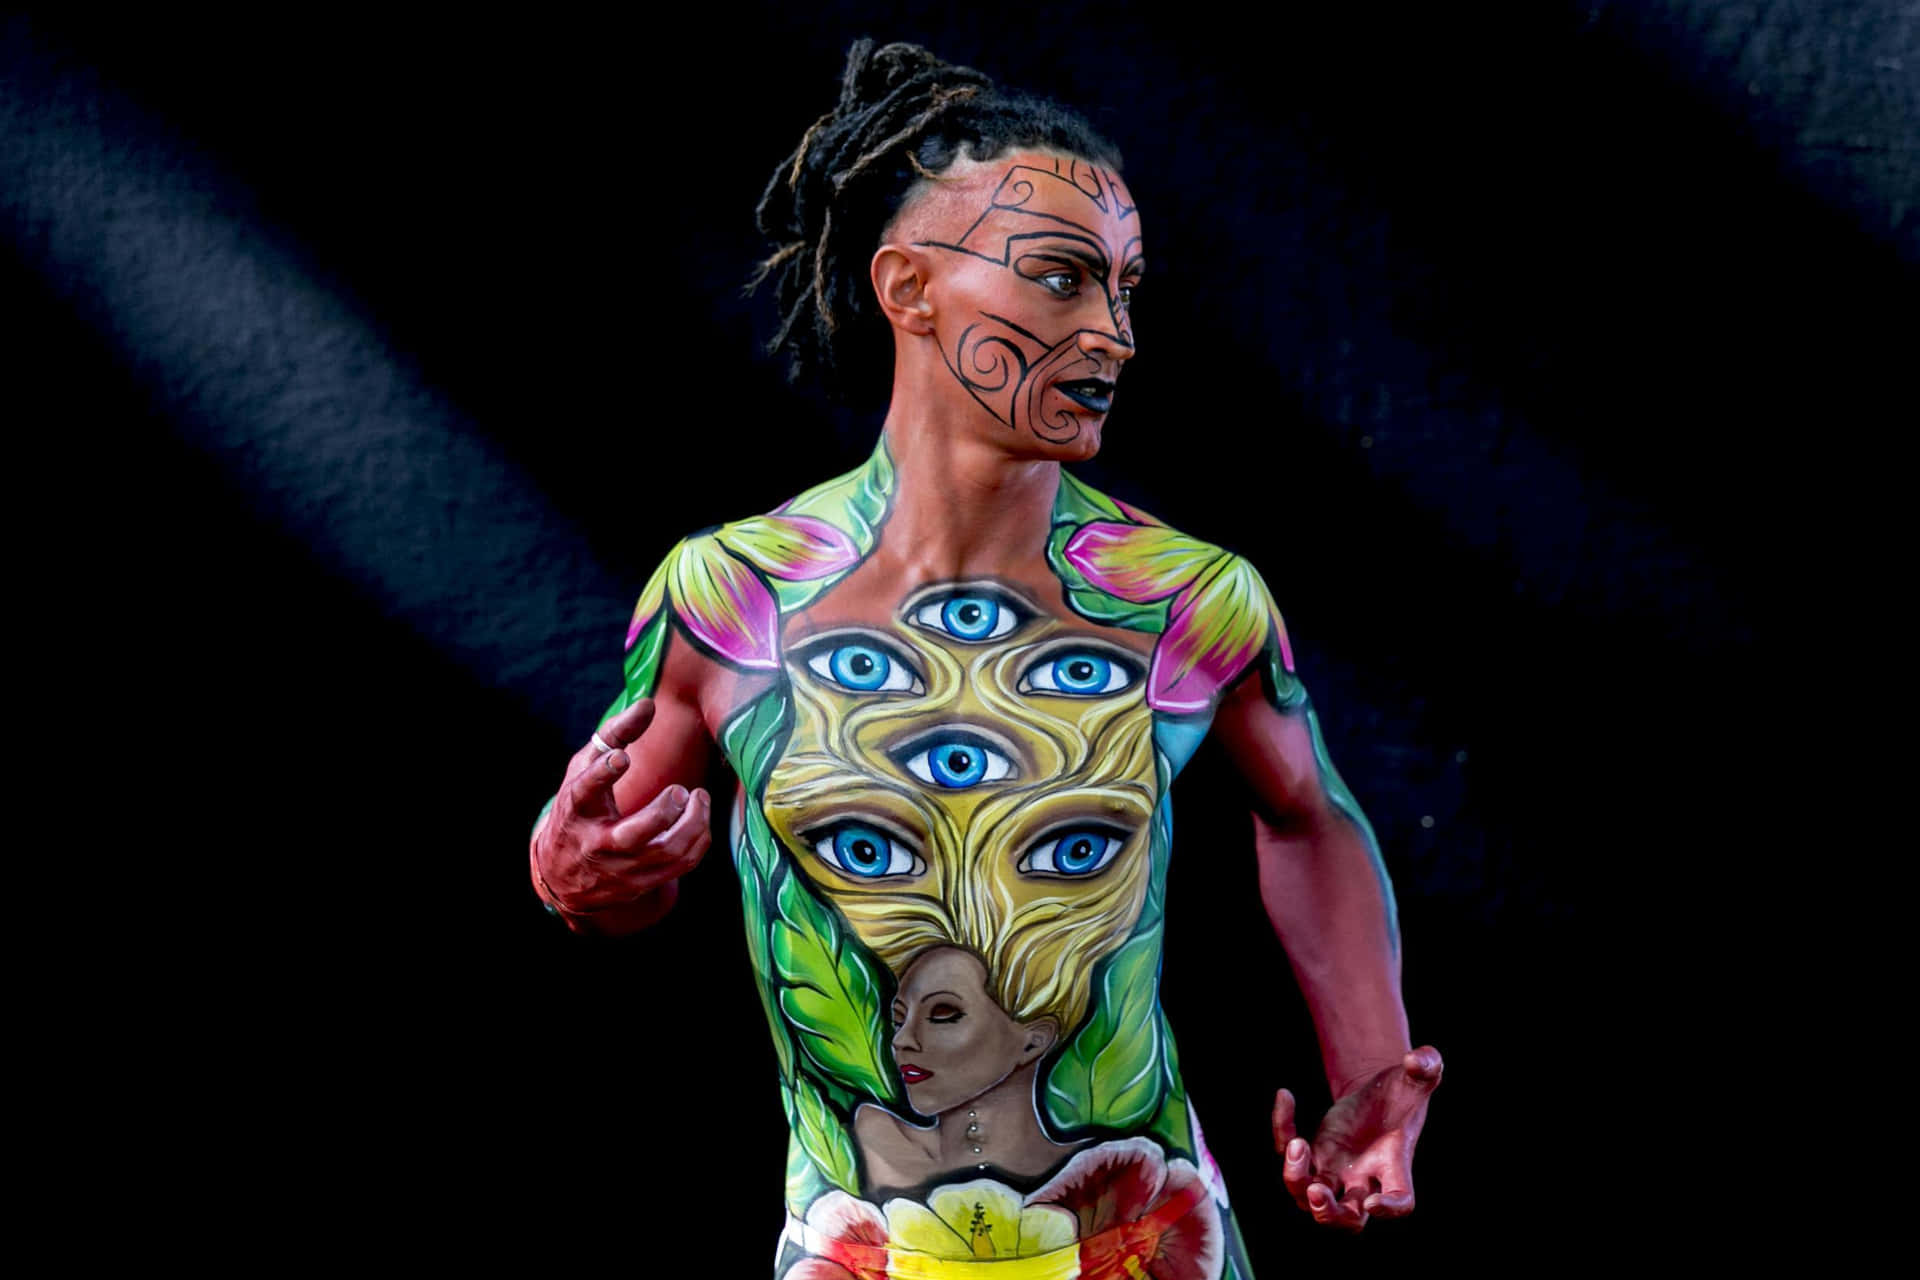 Celebrating art and self-expression at the Body Painting Festival